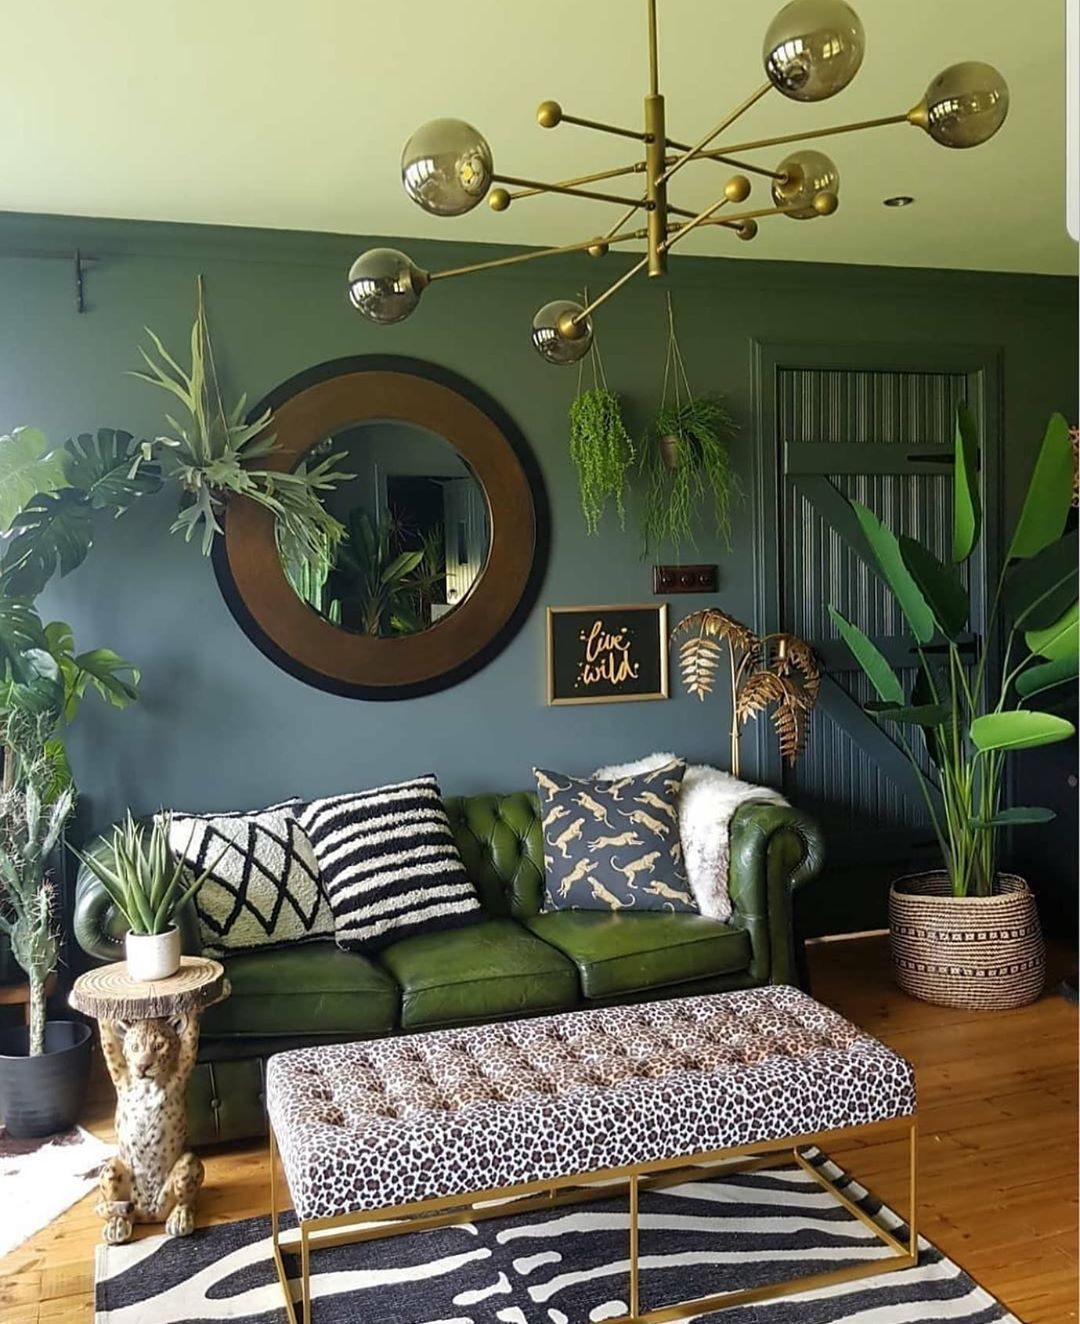 Green Living Room Design: 10 Ideas To Bring The Outdoors In